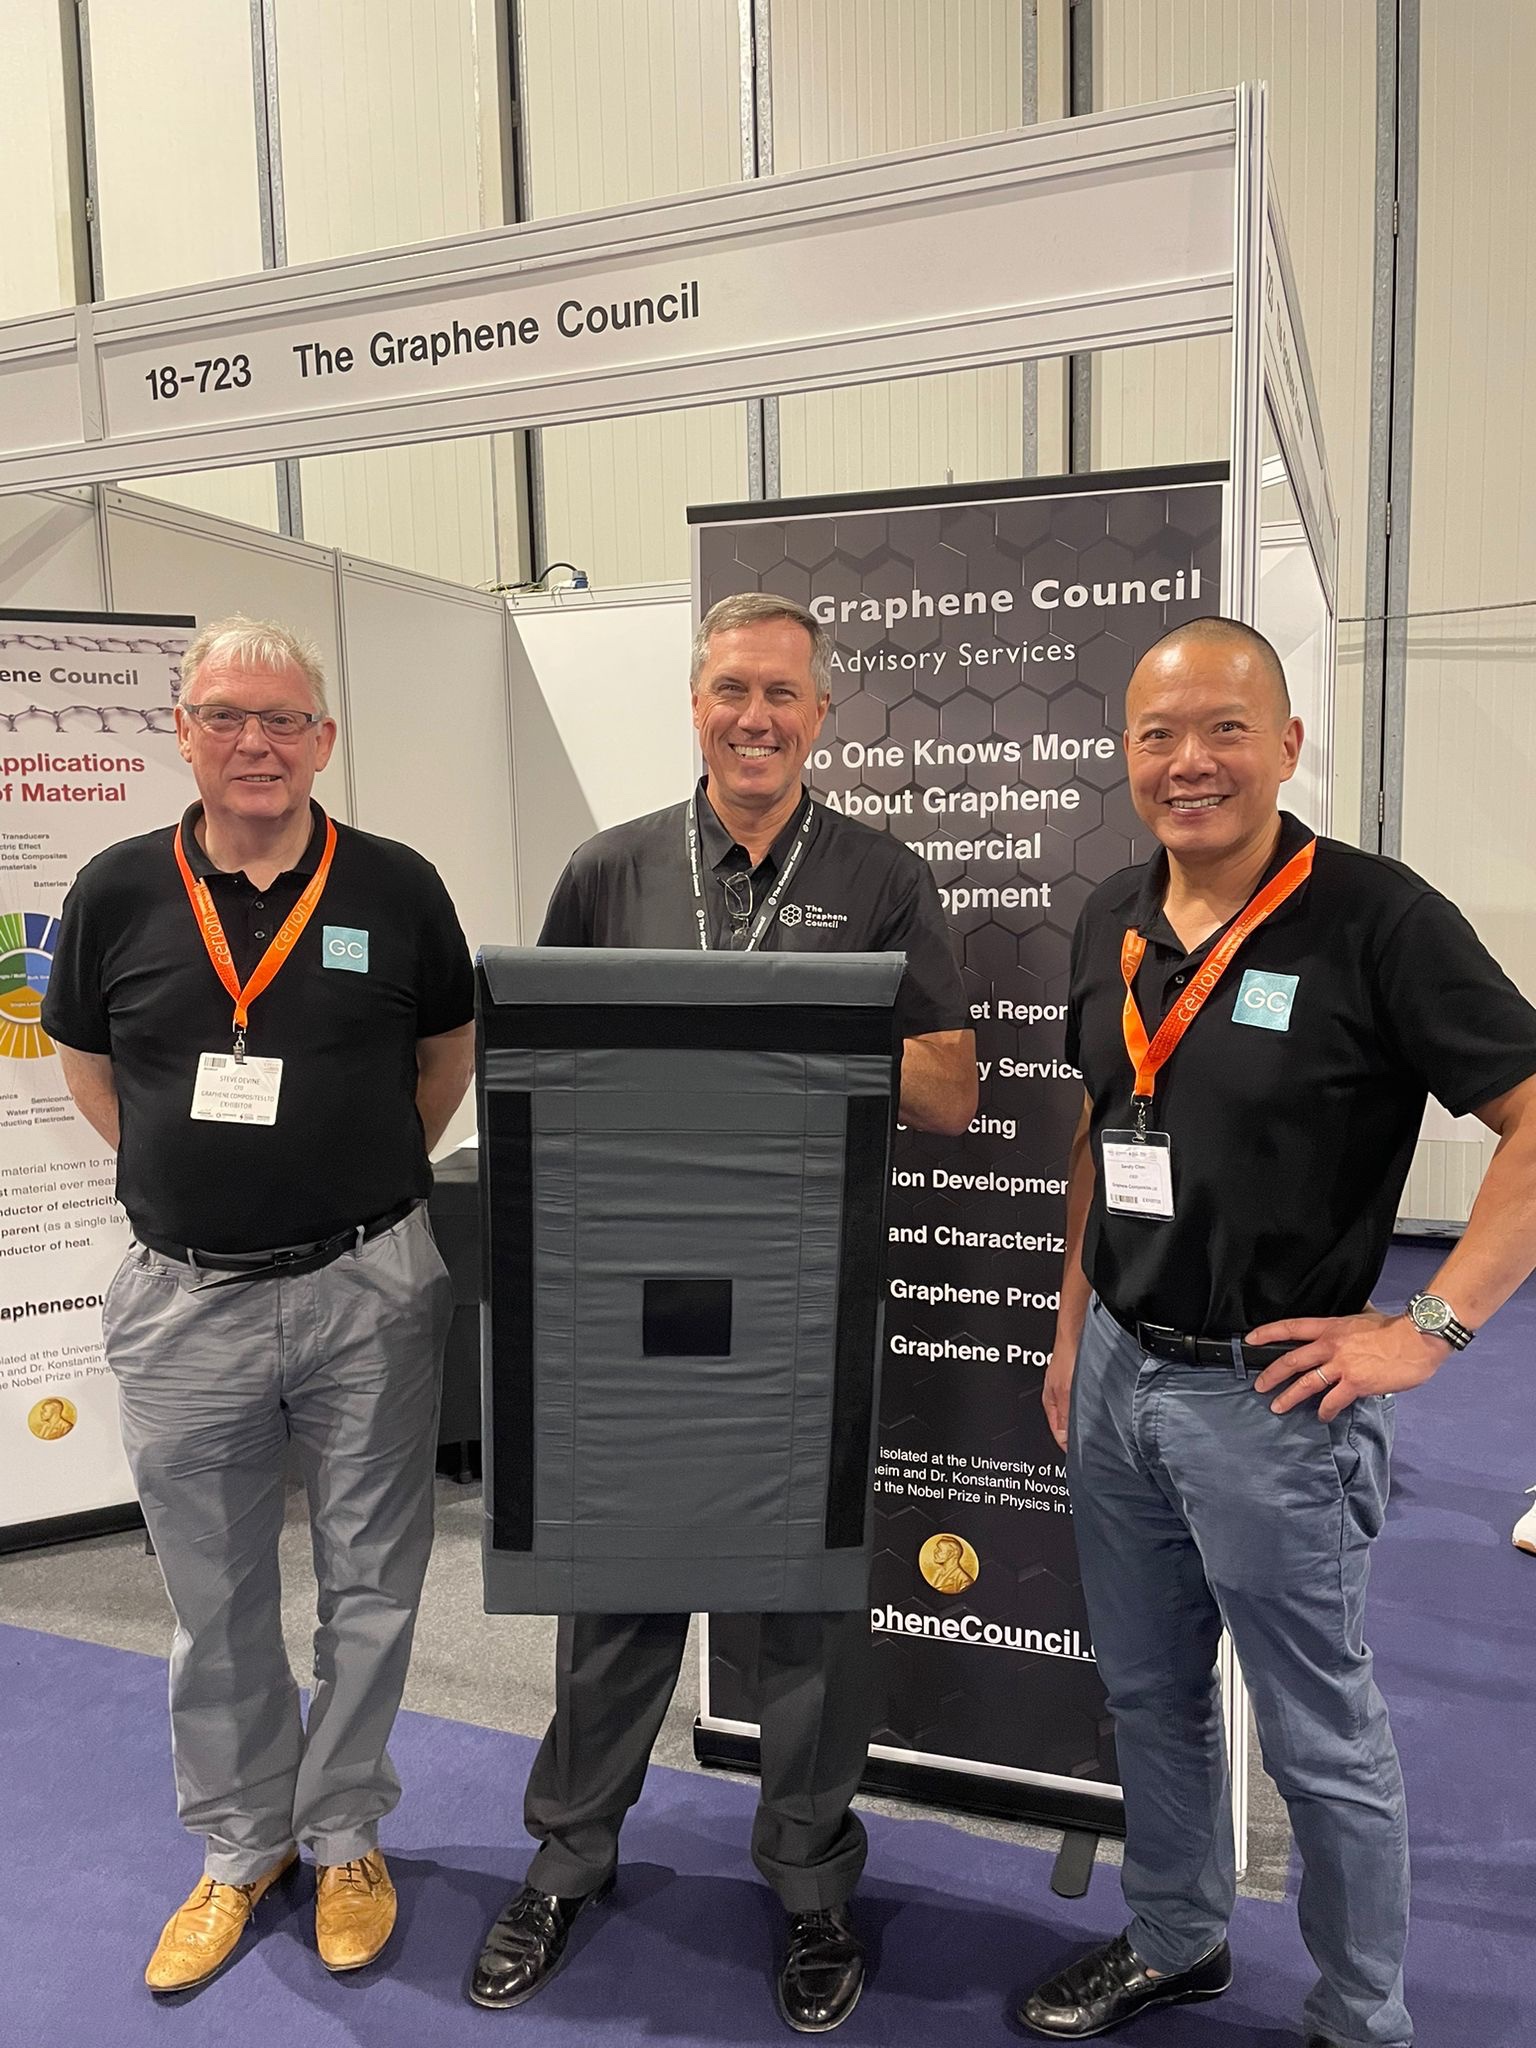 A fantastic few days at The Graphene Council conference and Advanced Materials Show!